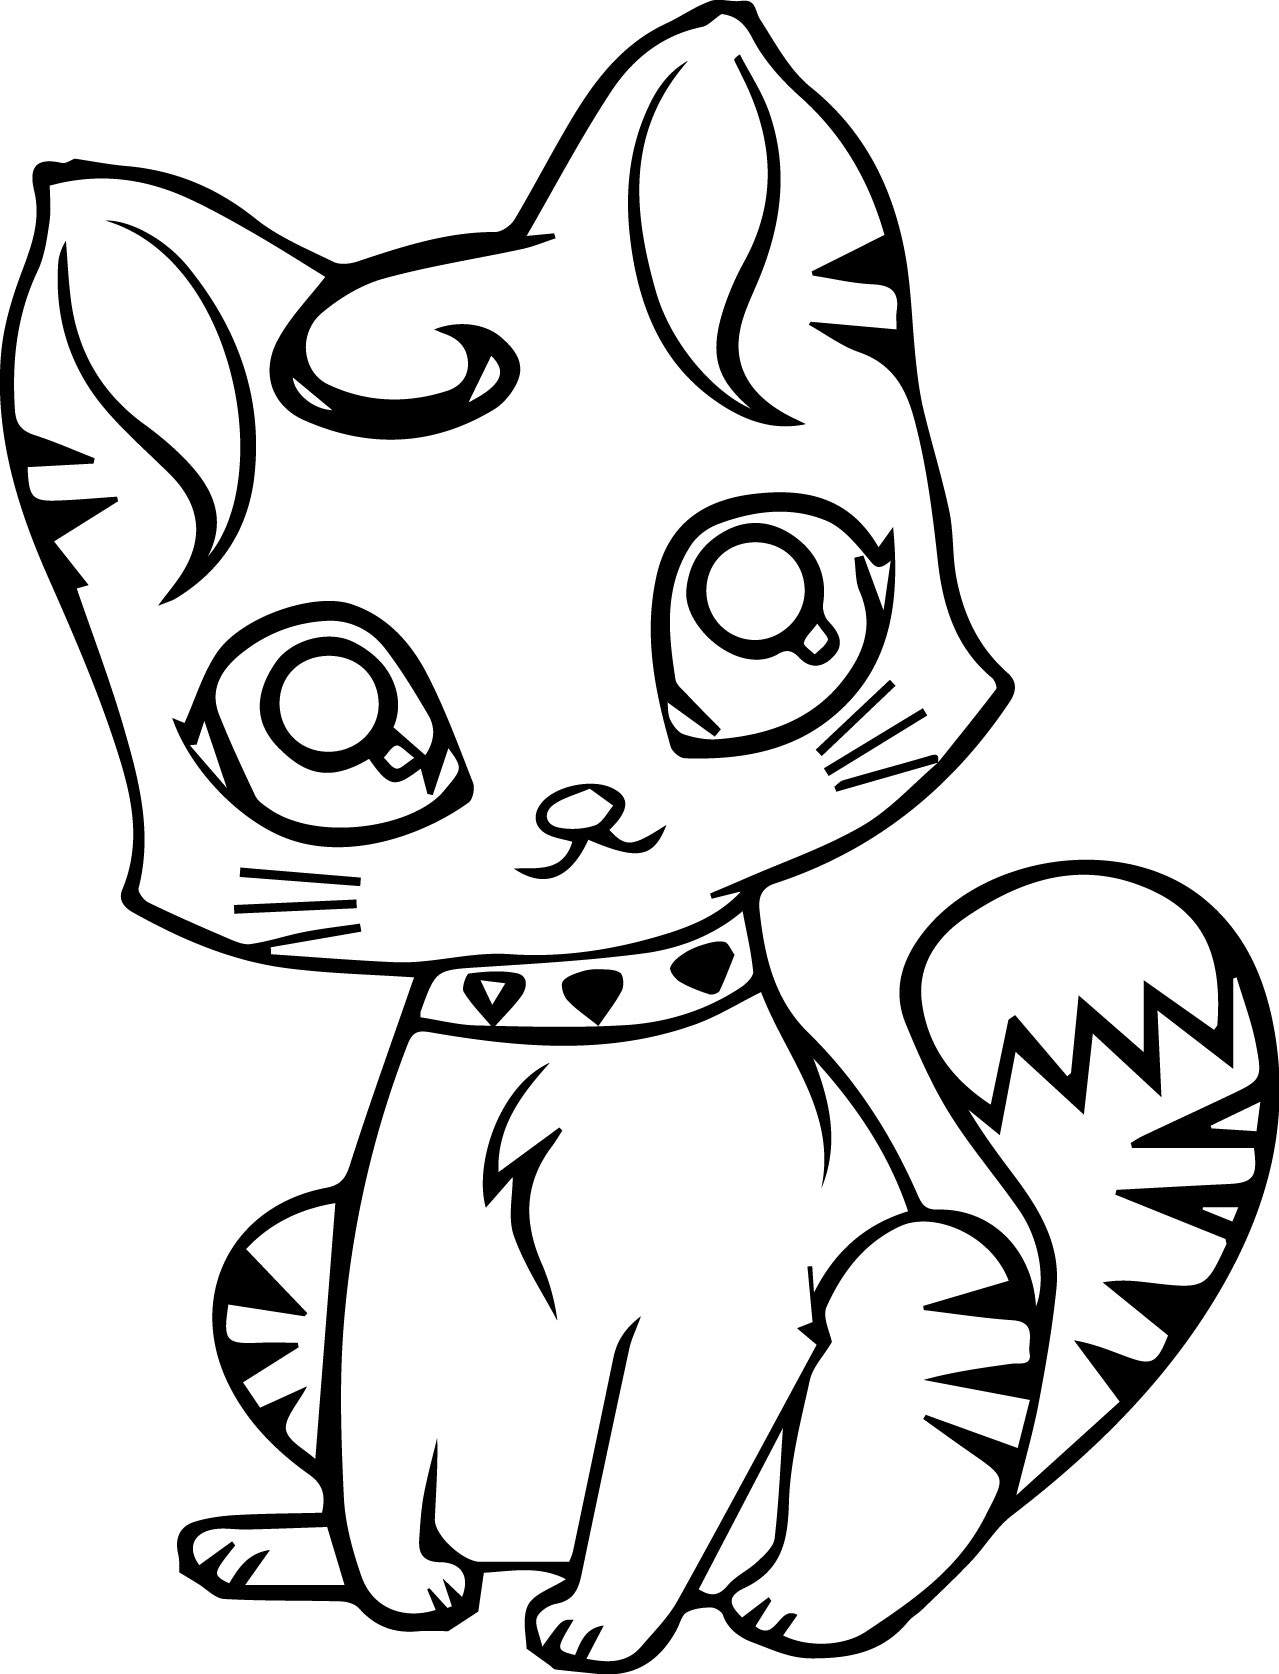 Sleeping Cat Coloring Pages at GetColorings.com   Free ...